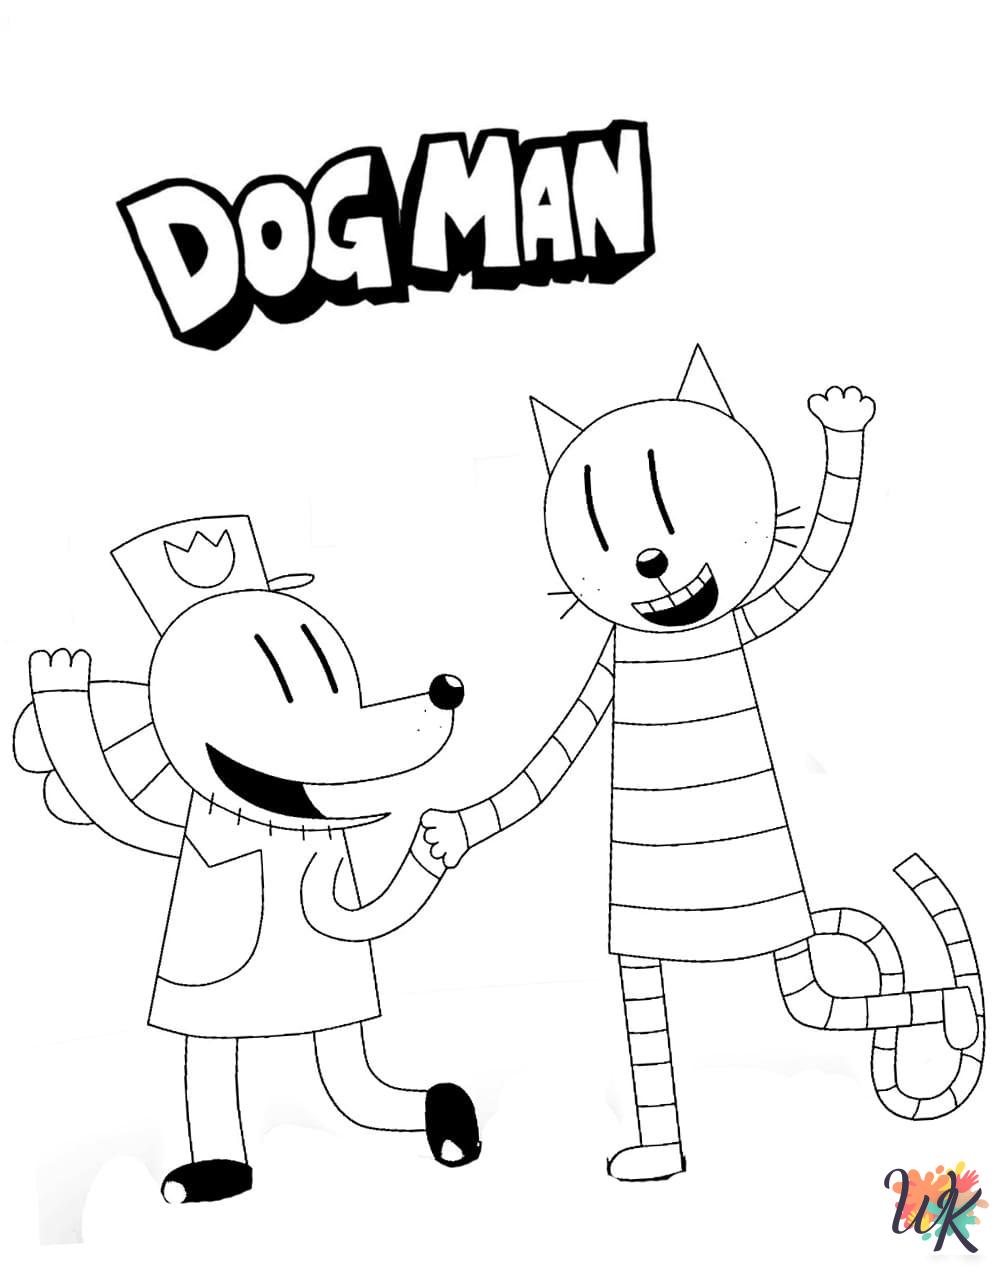 Dog Man coloring pages for adults pdf